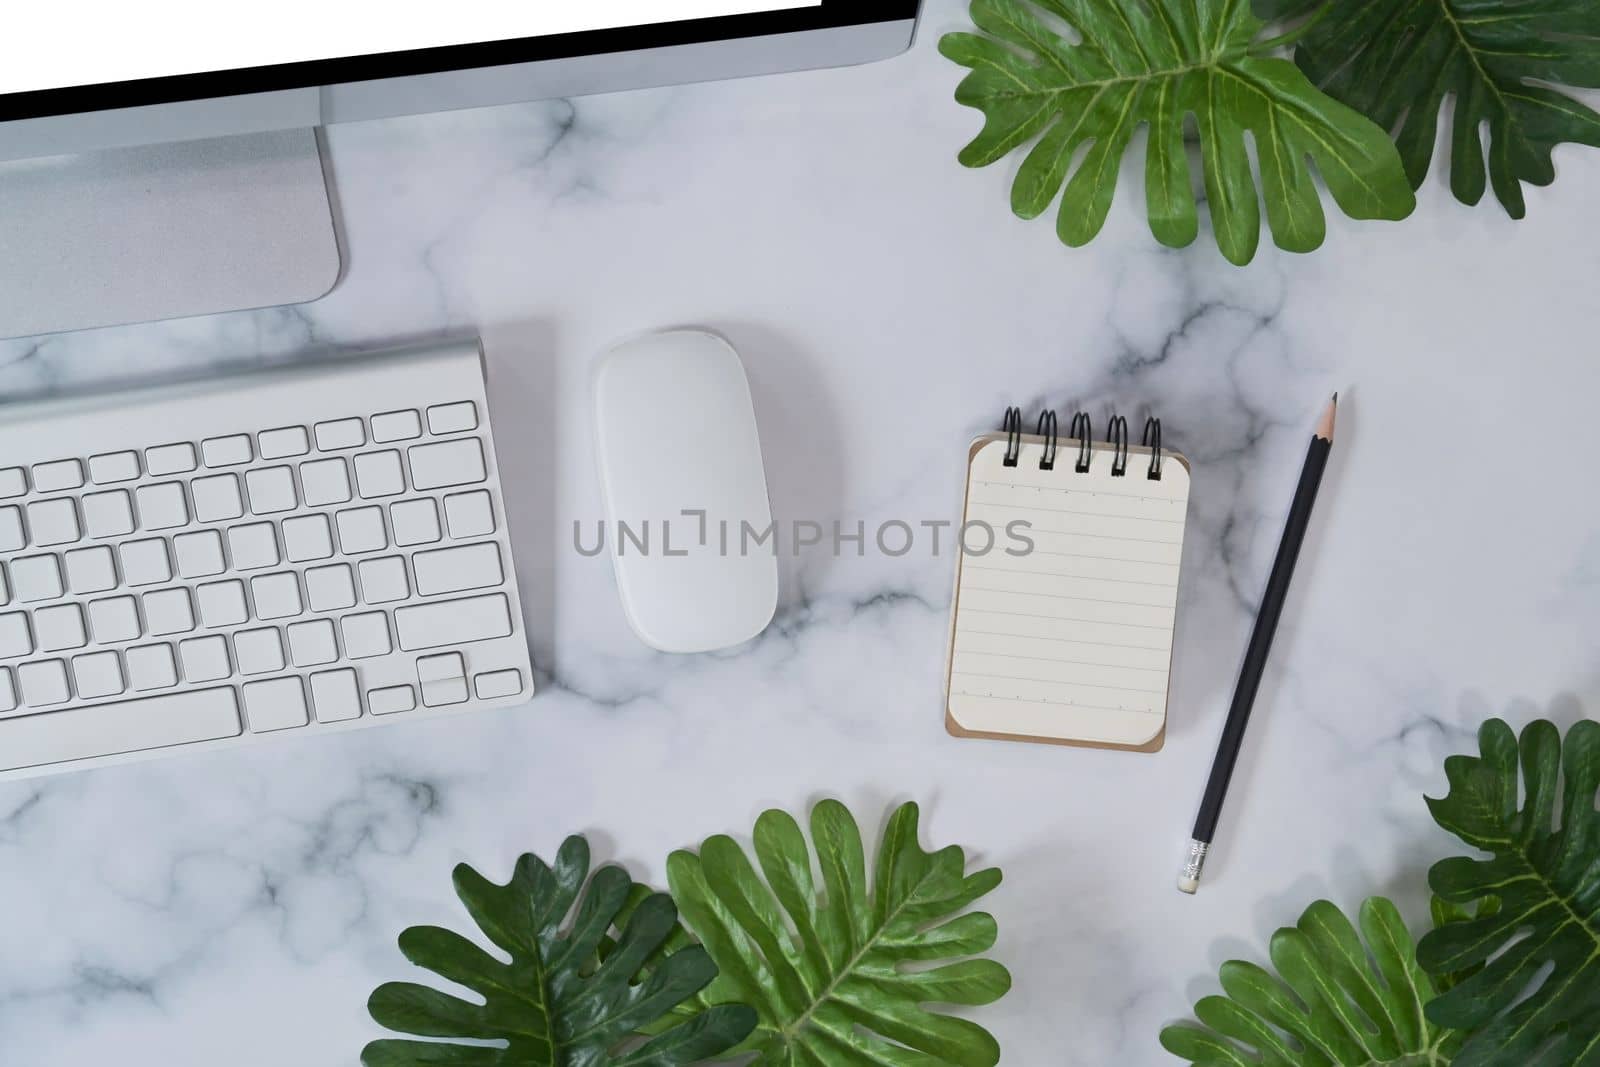 Empt notebook and computer on marble background. by prathanchorruangsak